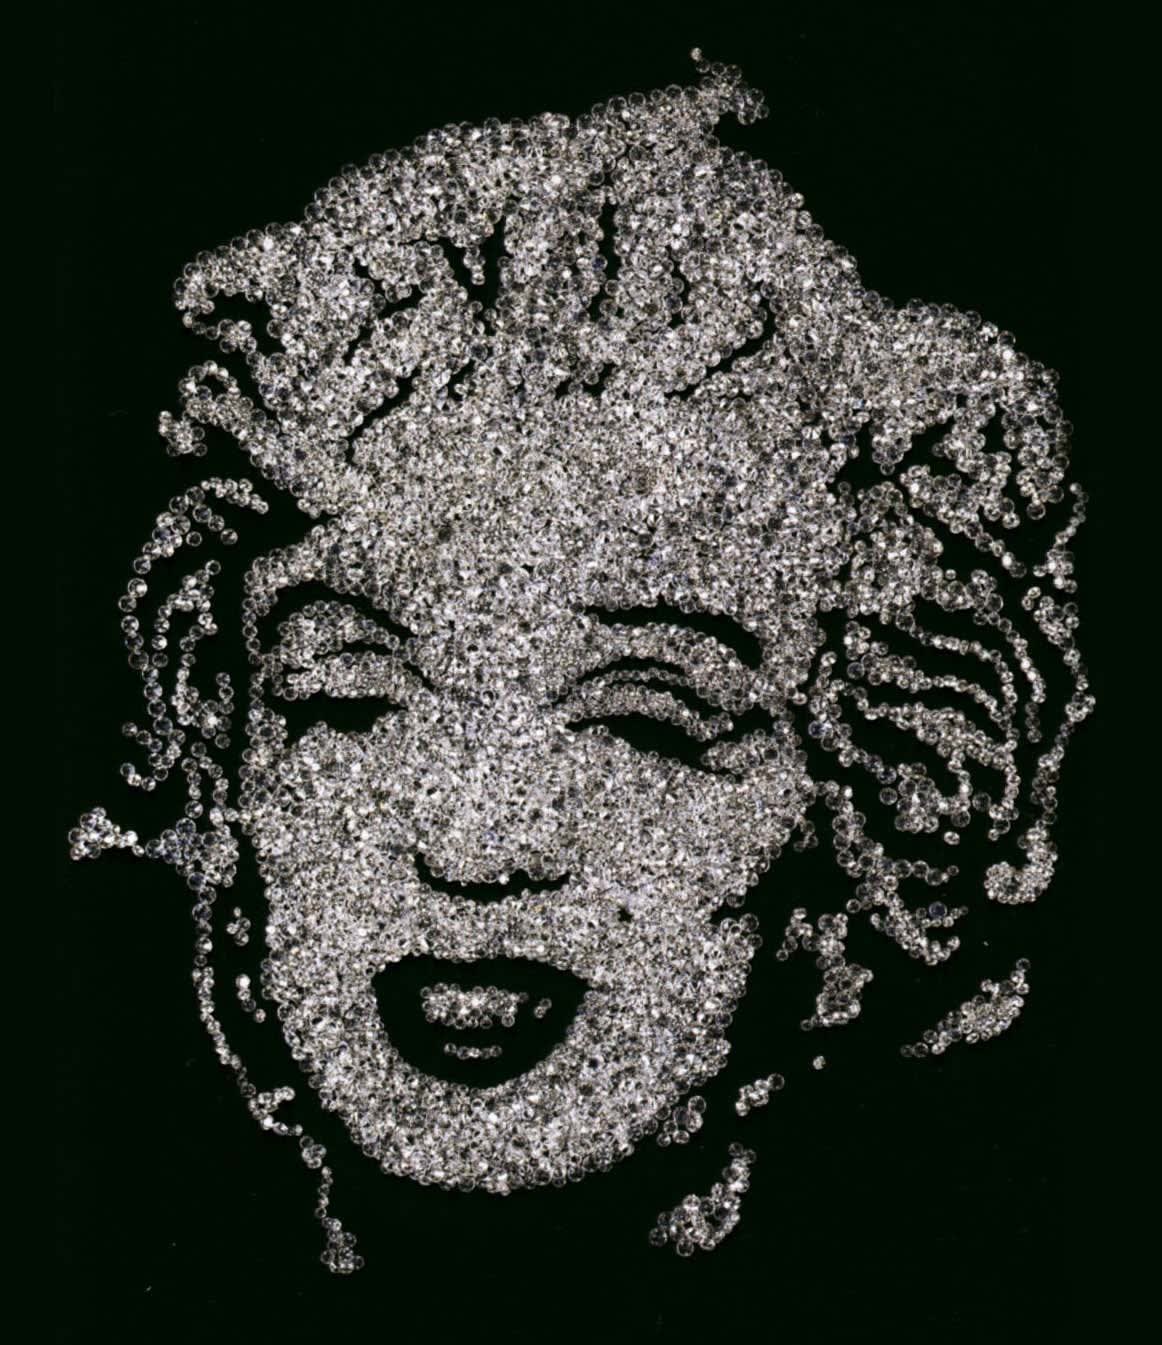 Vik Muniz photograph of Marilyn Monroe's face made out of diamonds against black background